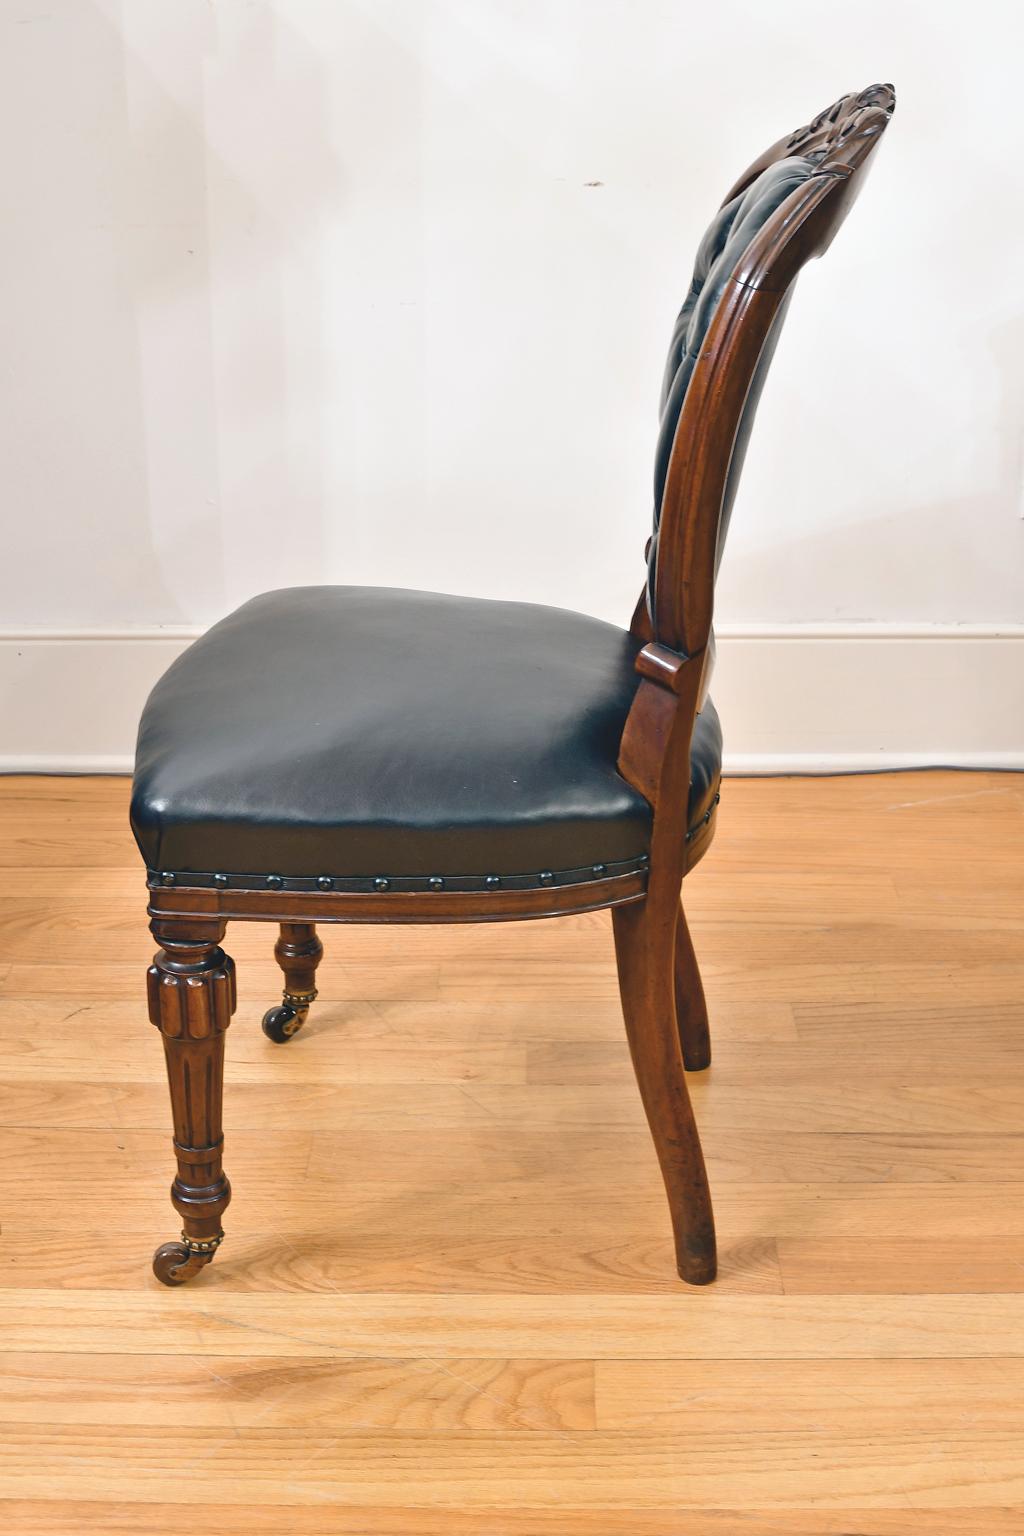 Polished Set of 10 Antique English Victorian Dining Chairs with Black Tufted Leather